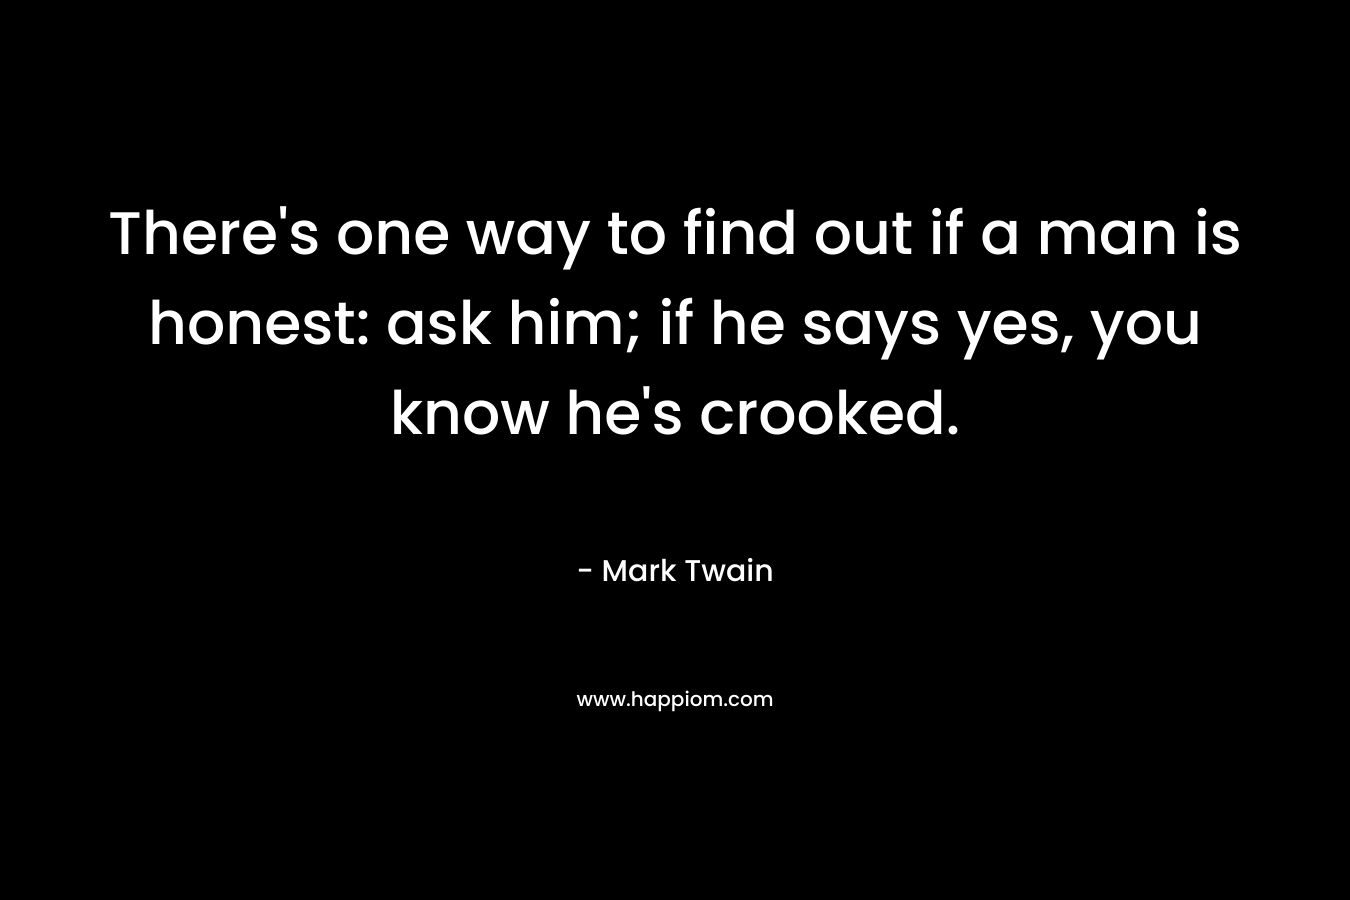 There's one way to find out if a man is honest: ask him; if he says yes, you know he's crooked.